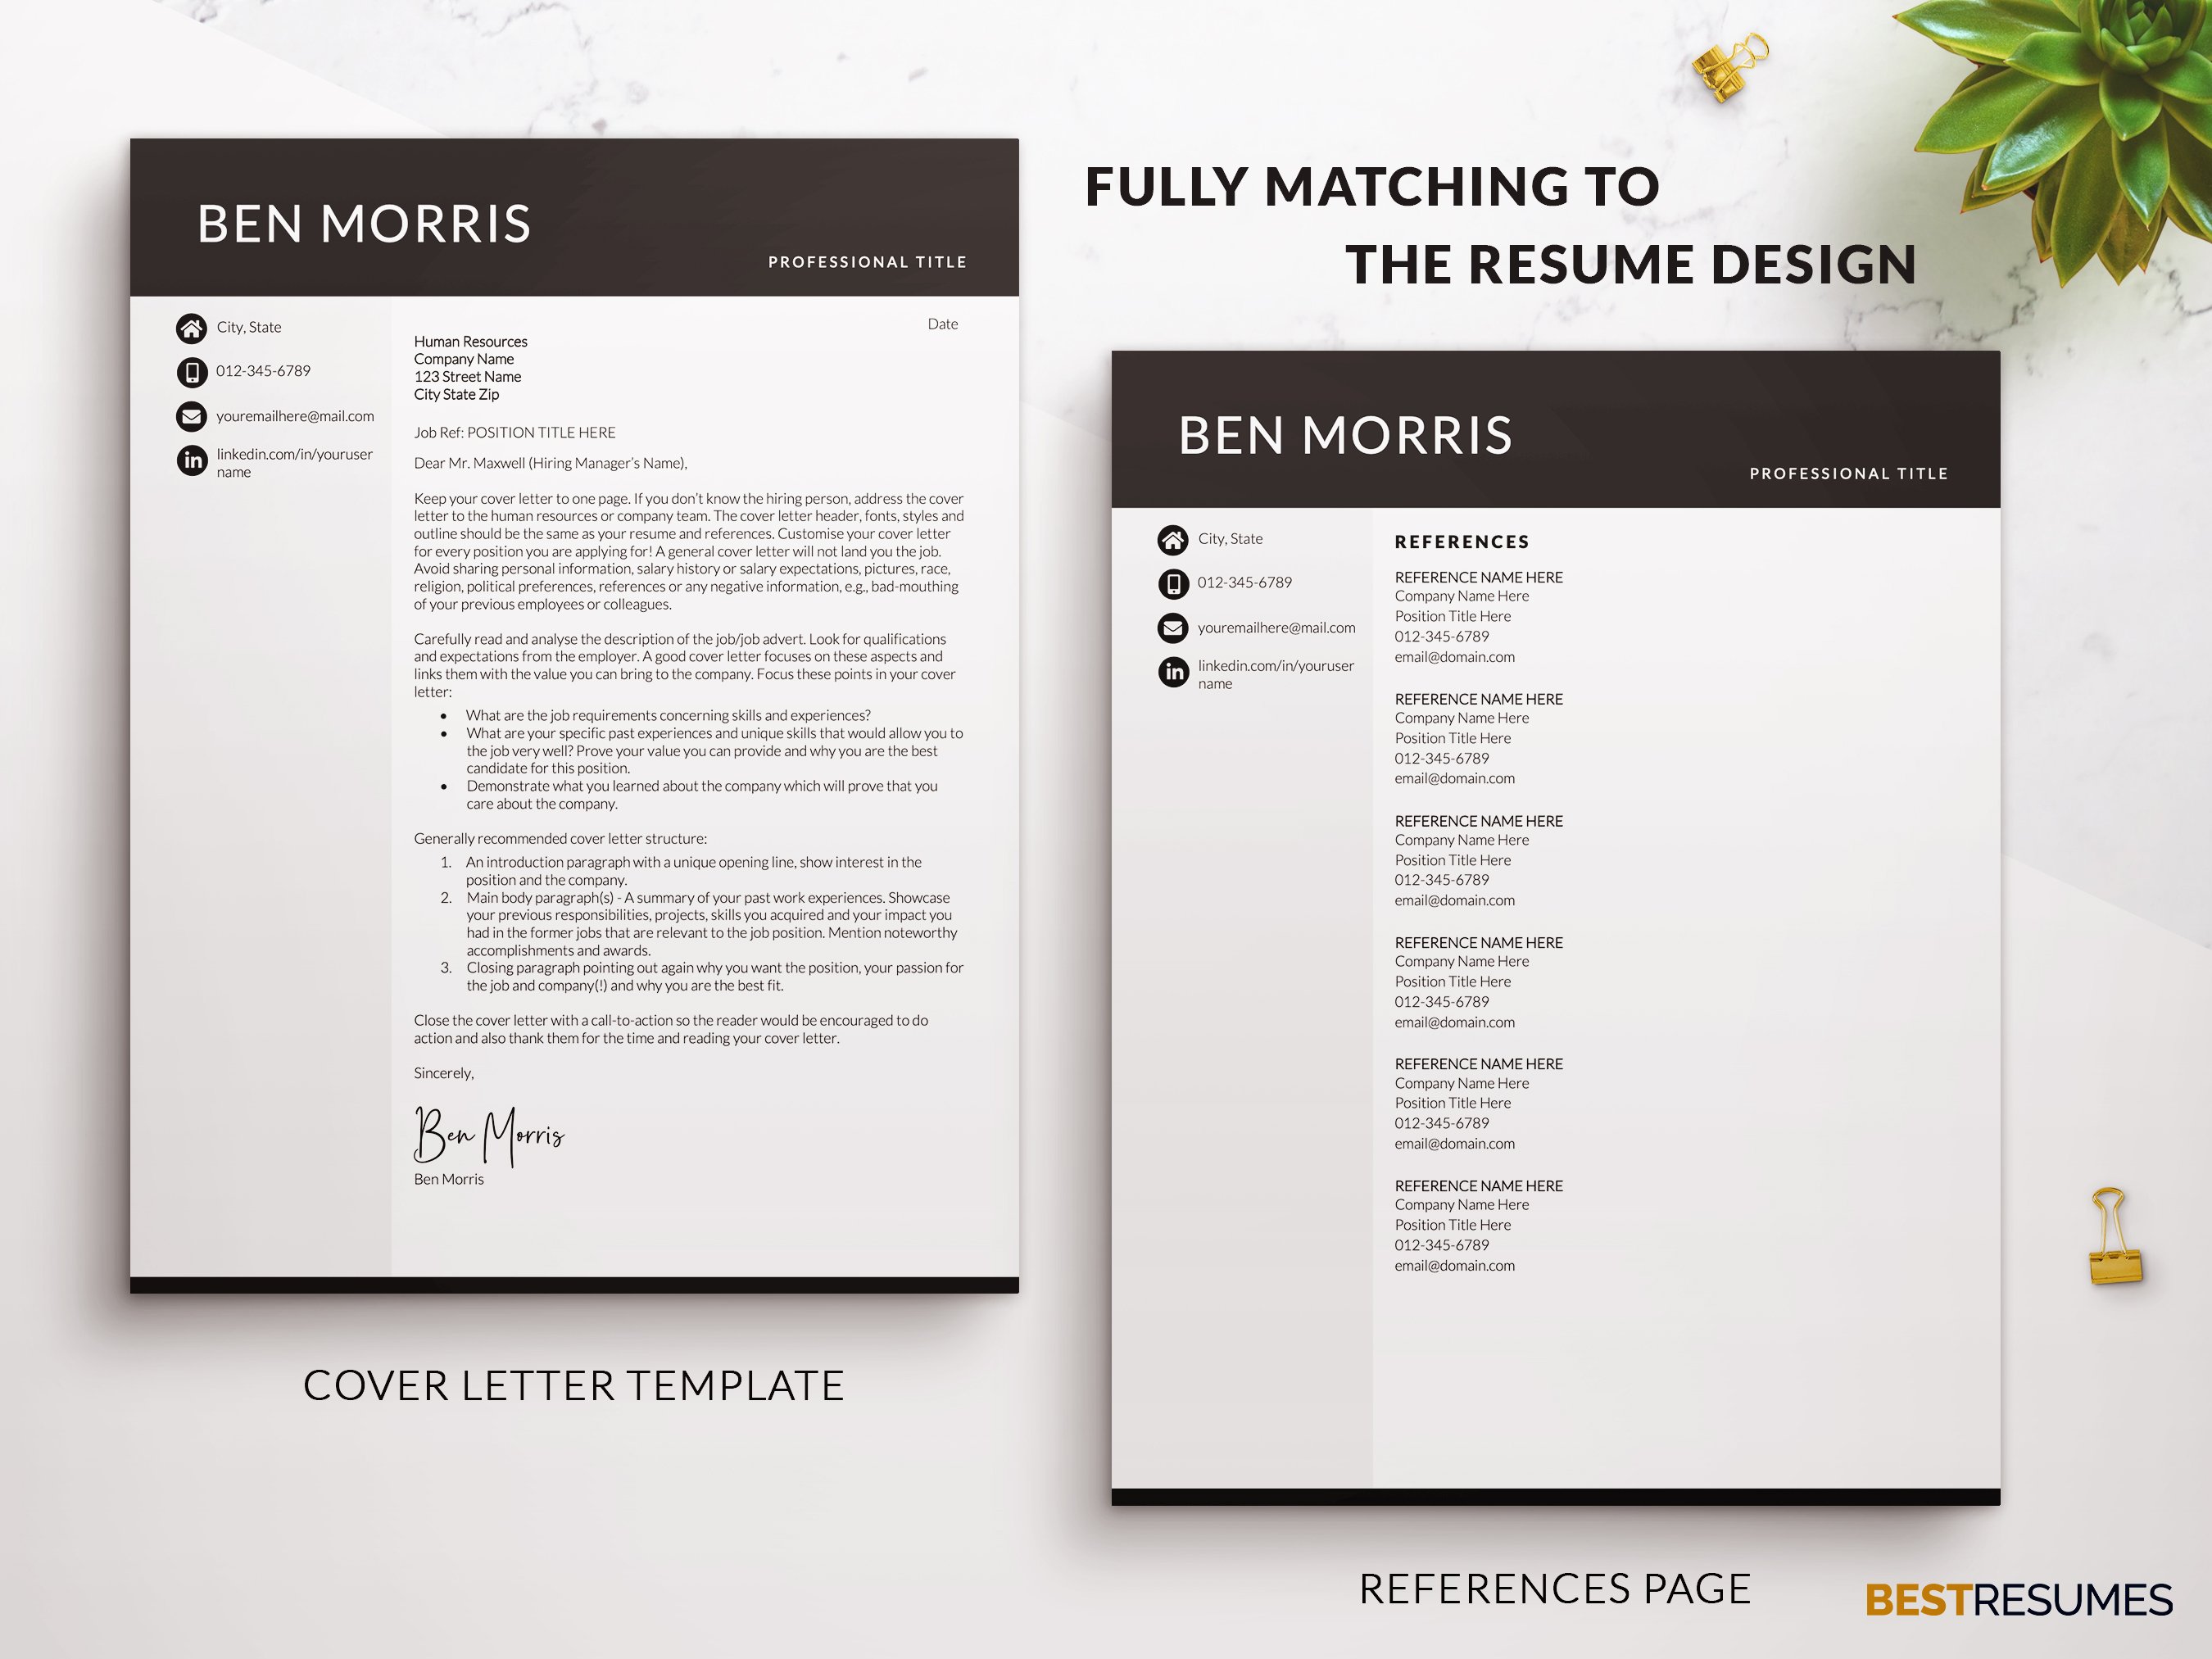 professional resume template modern page cover letter references ben morris 874